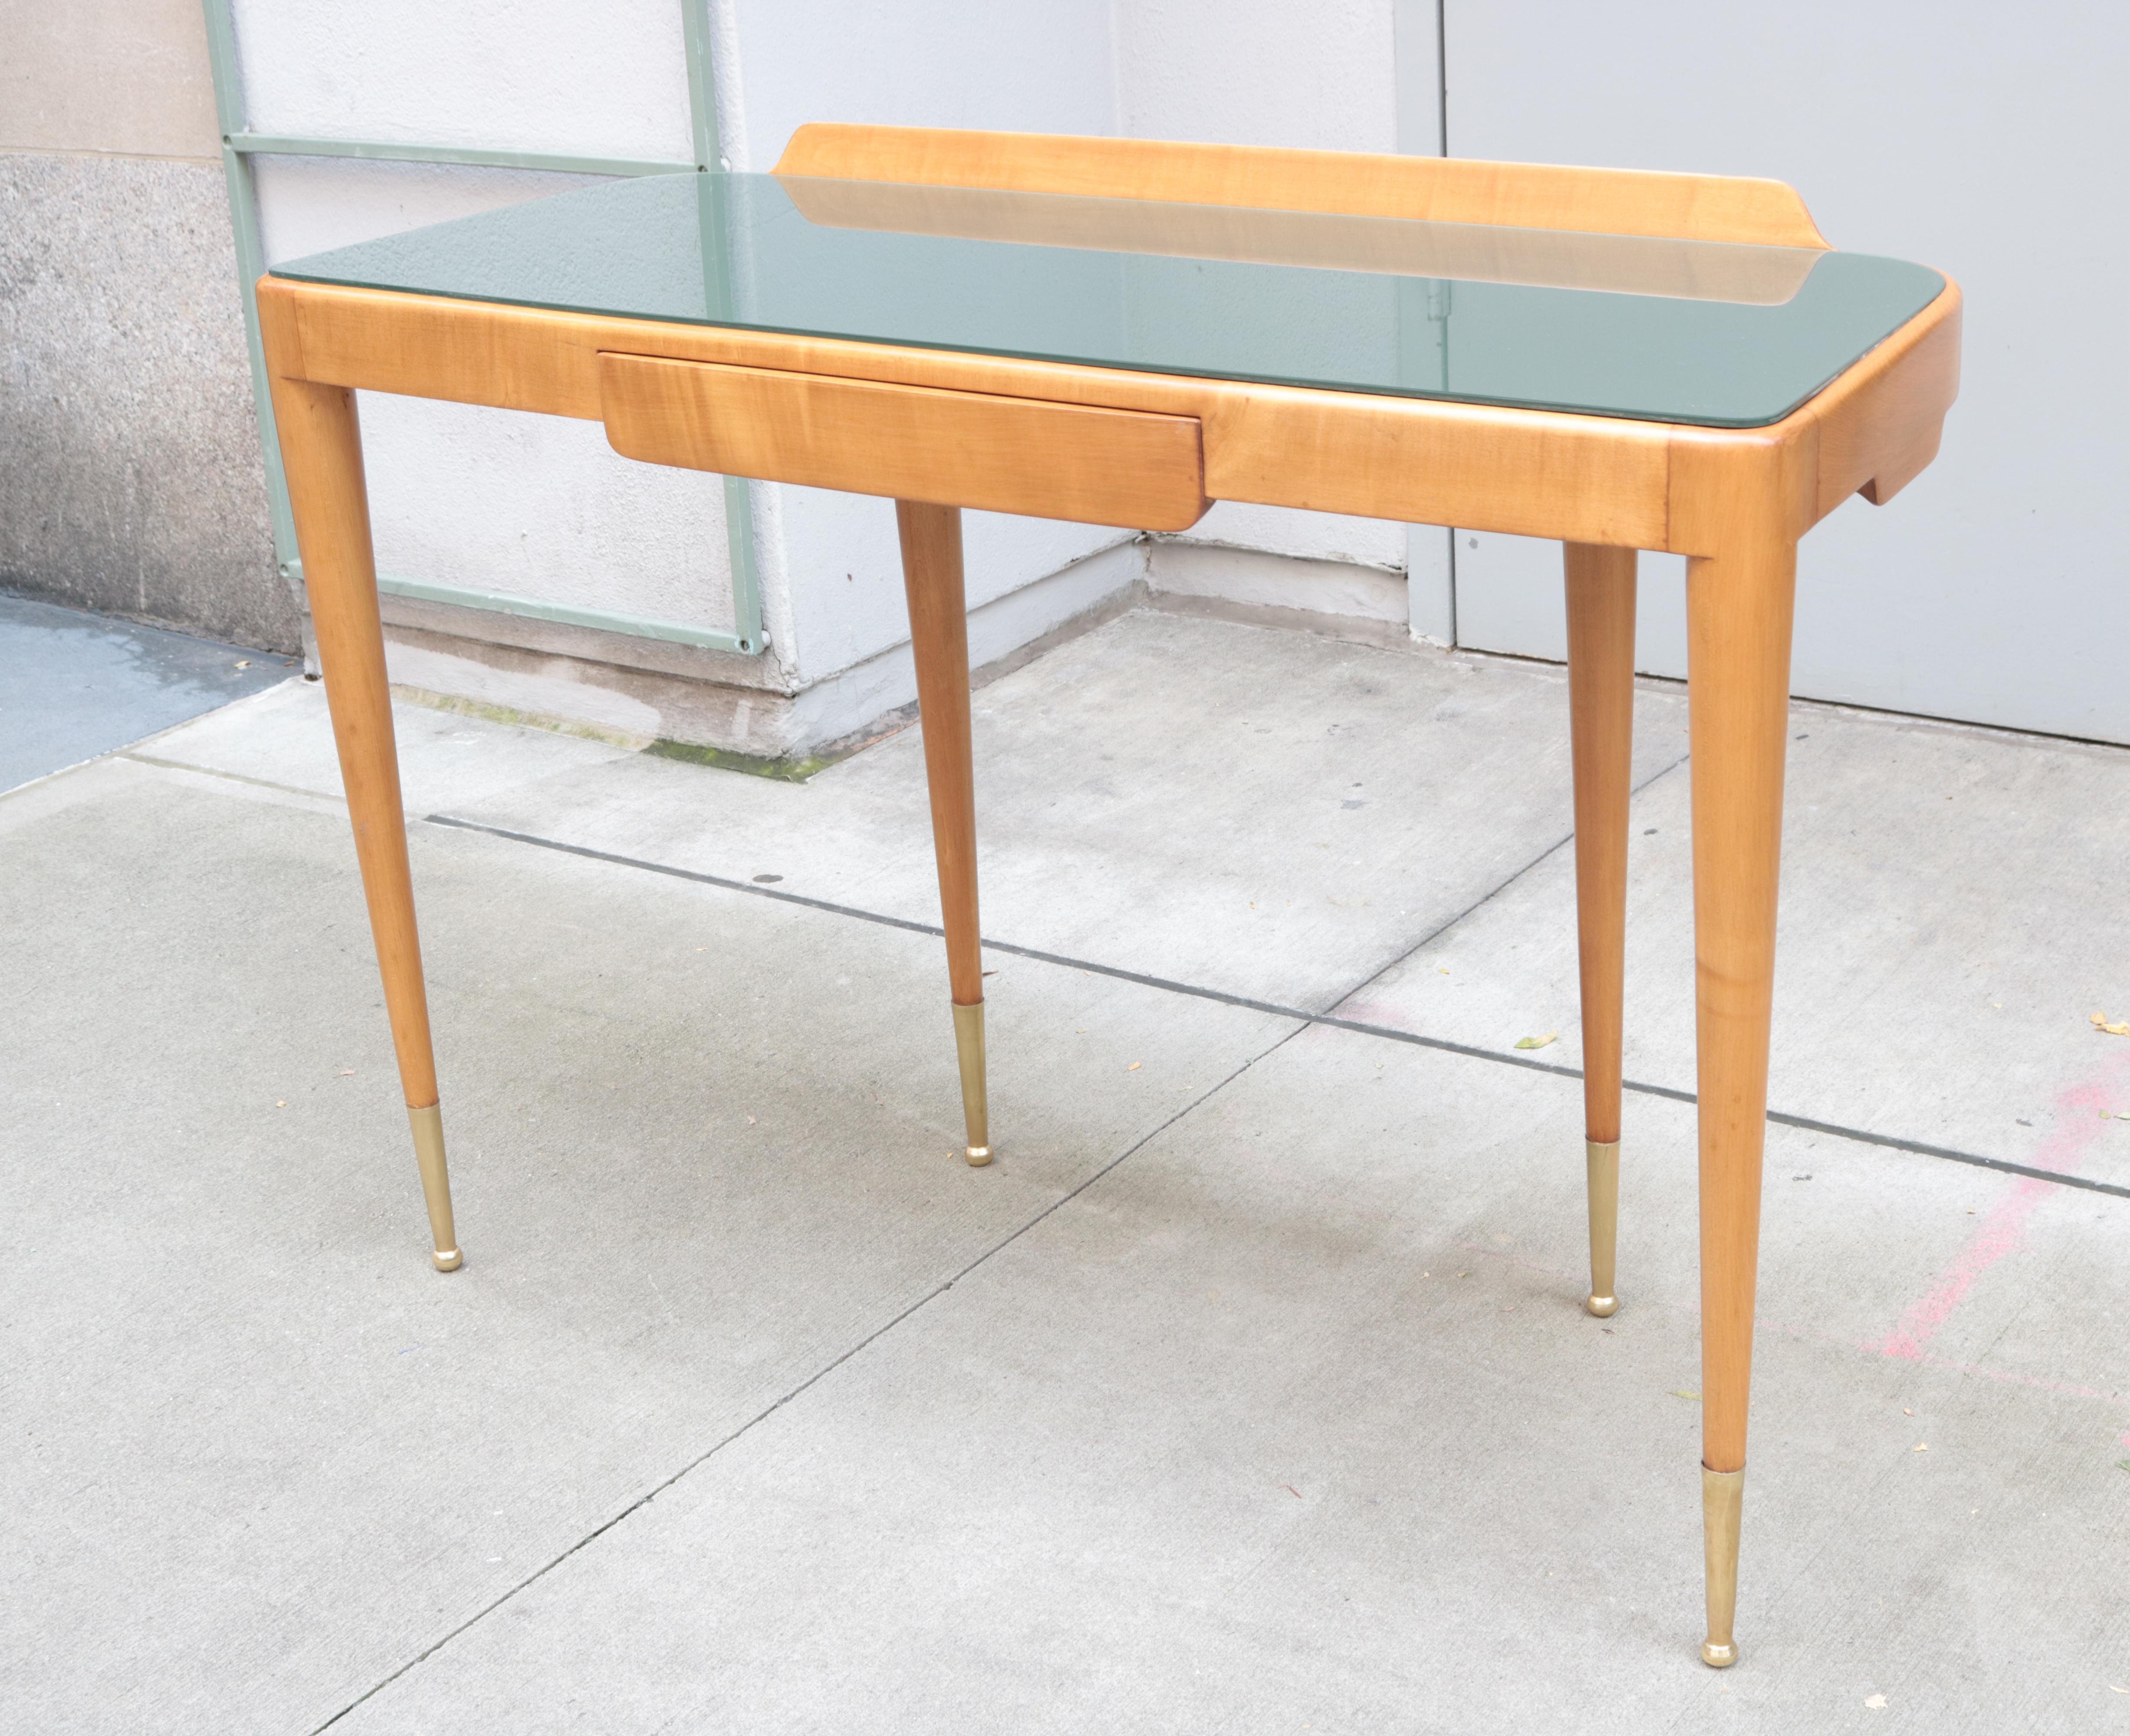 An Italian modernist console with single drawer.
Fruitwood with glass top and brass sabots.